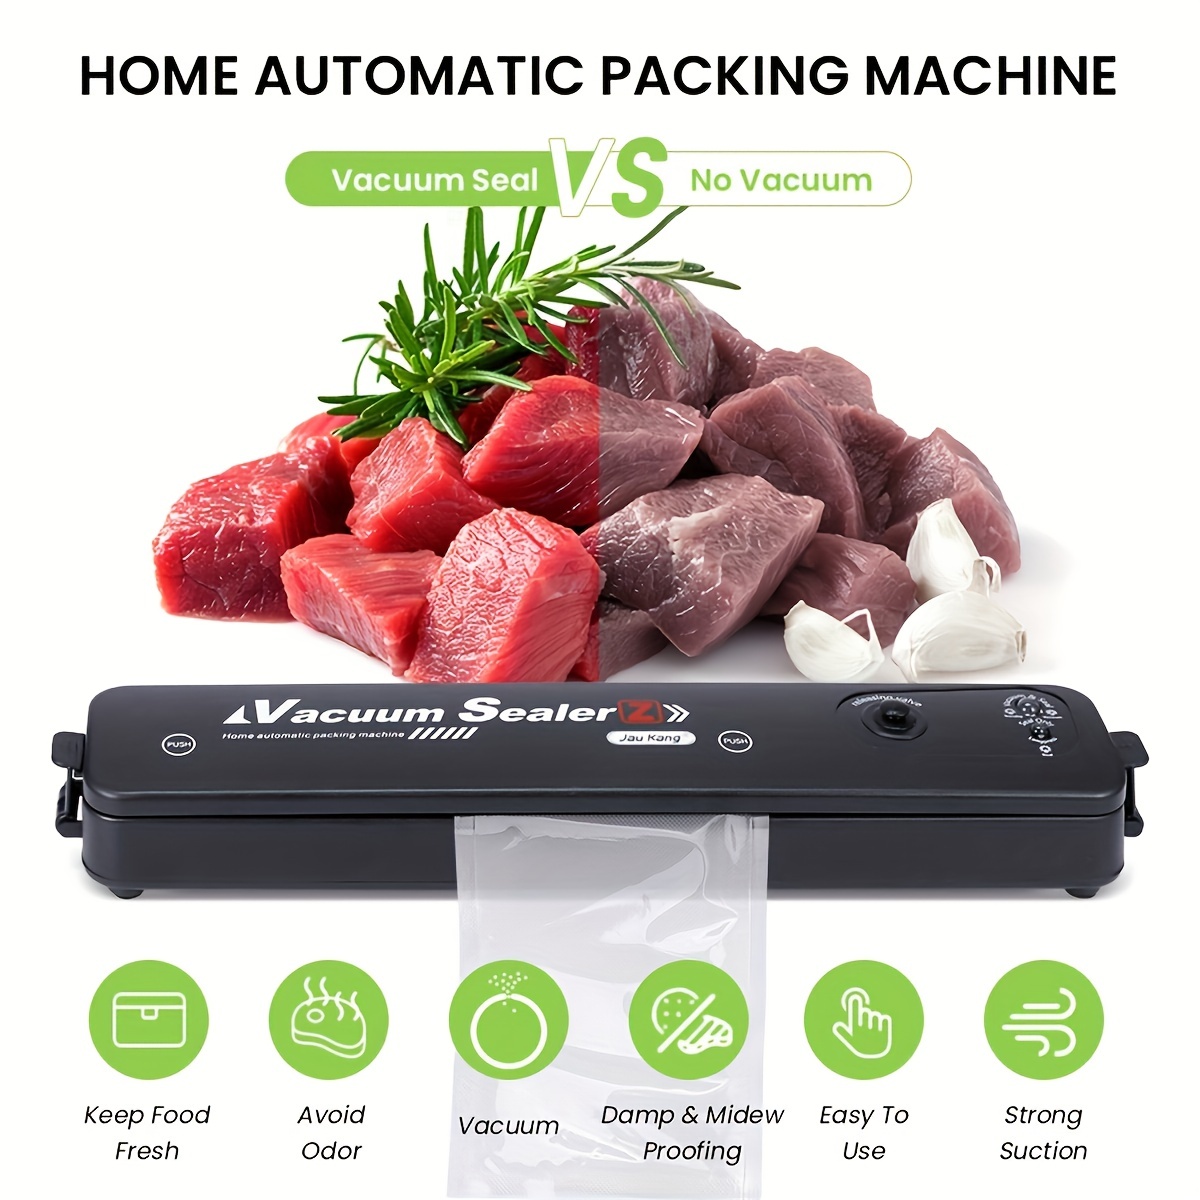 Vacuum Sealer For Food Storage - Automatic Air Sealing System For